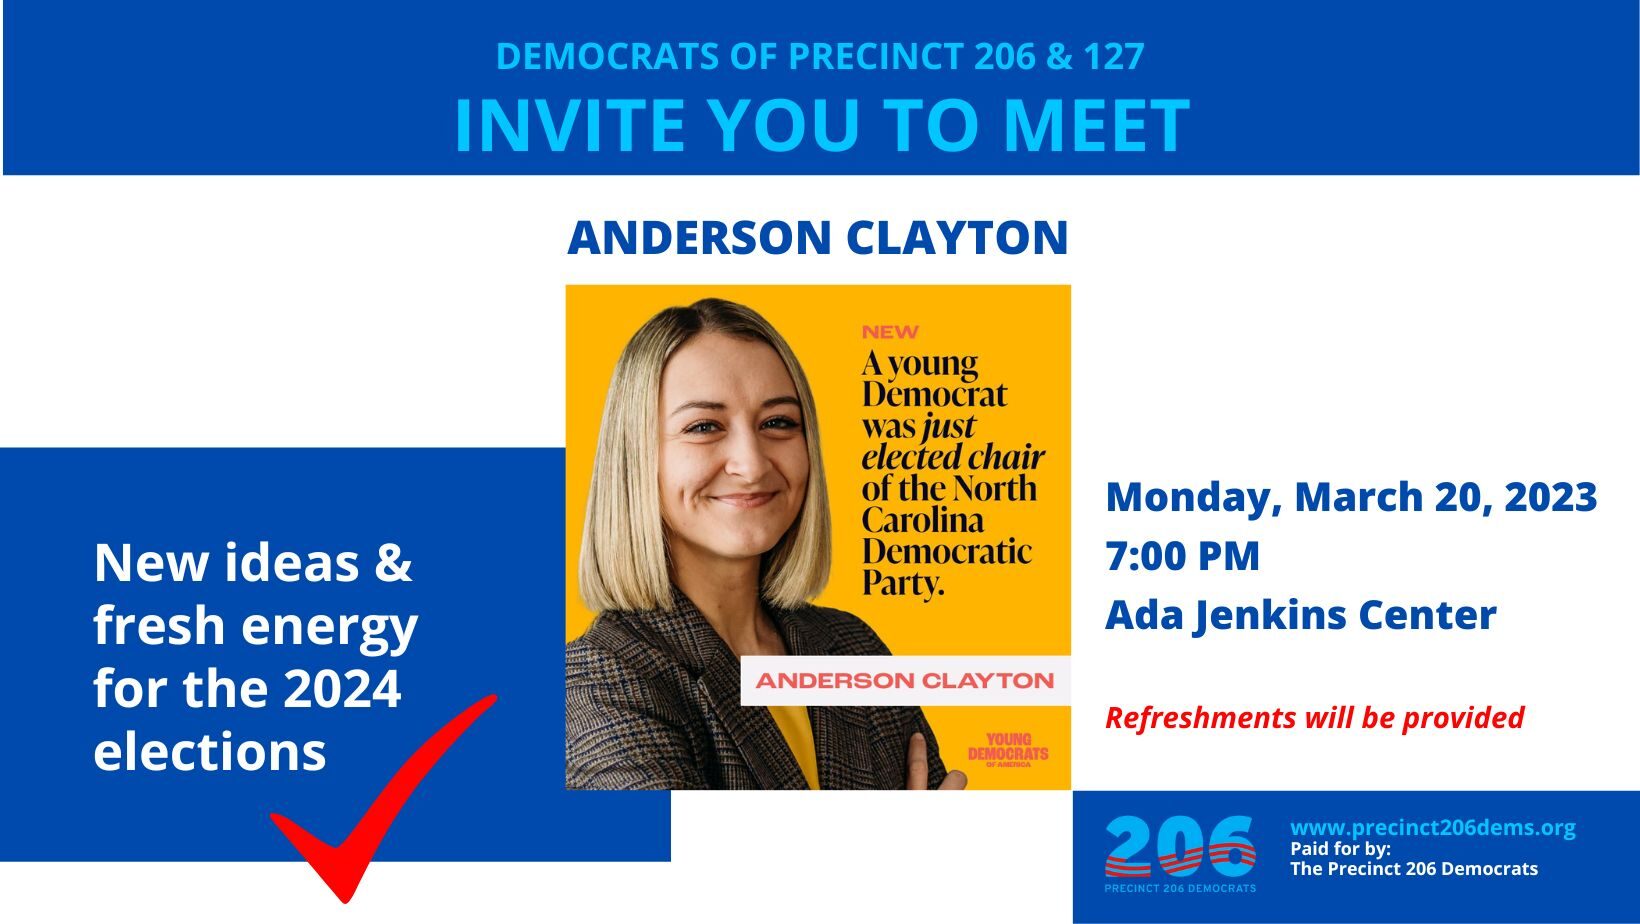 Invitation to Meet Anderson Clayton, the new chair of the North Carolina Democratic Party. Monday, March 20, 2023 at 7pm in the Ada Jenkins Center. Refreshments will be provided.